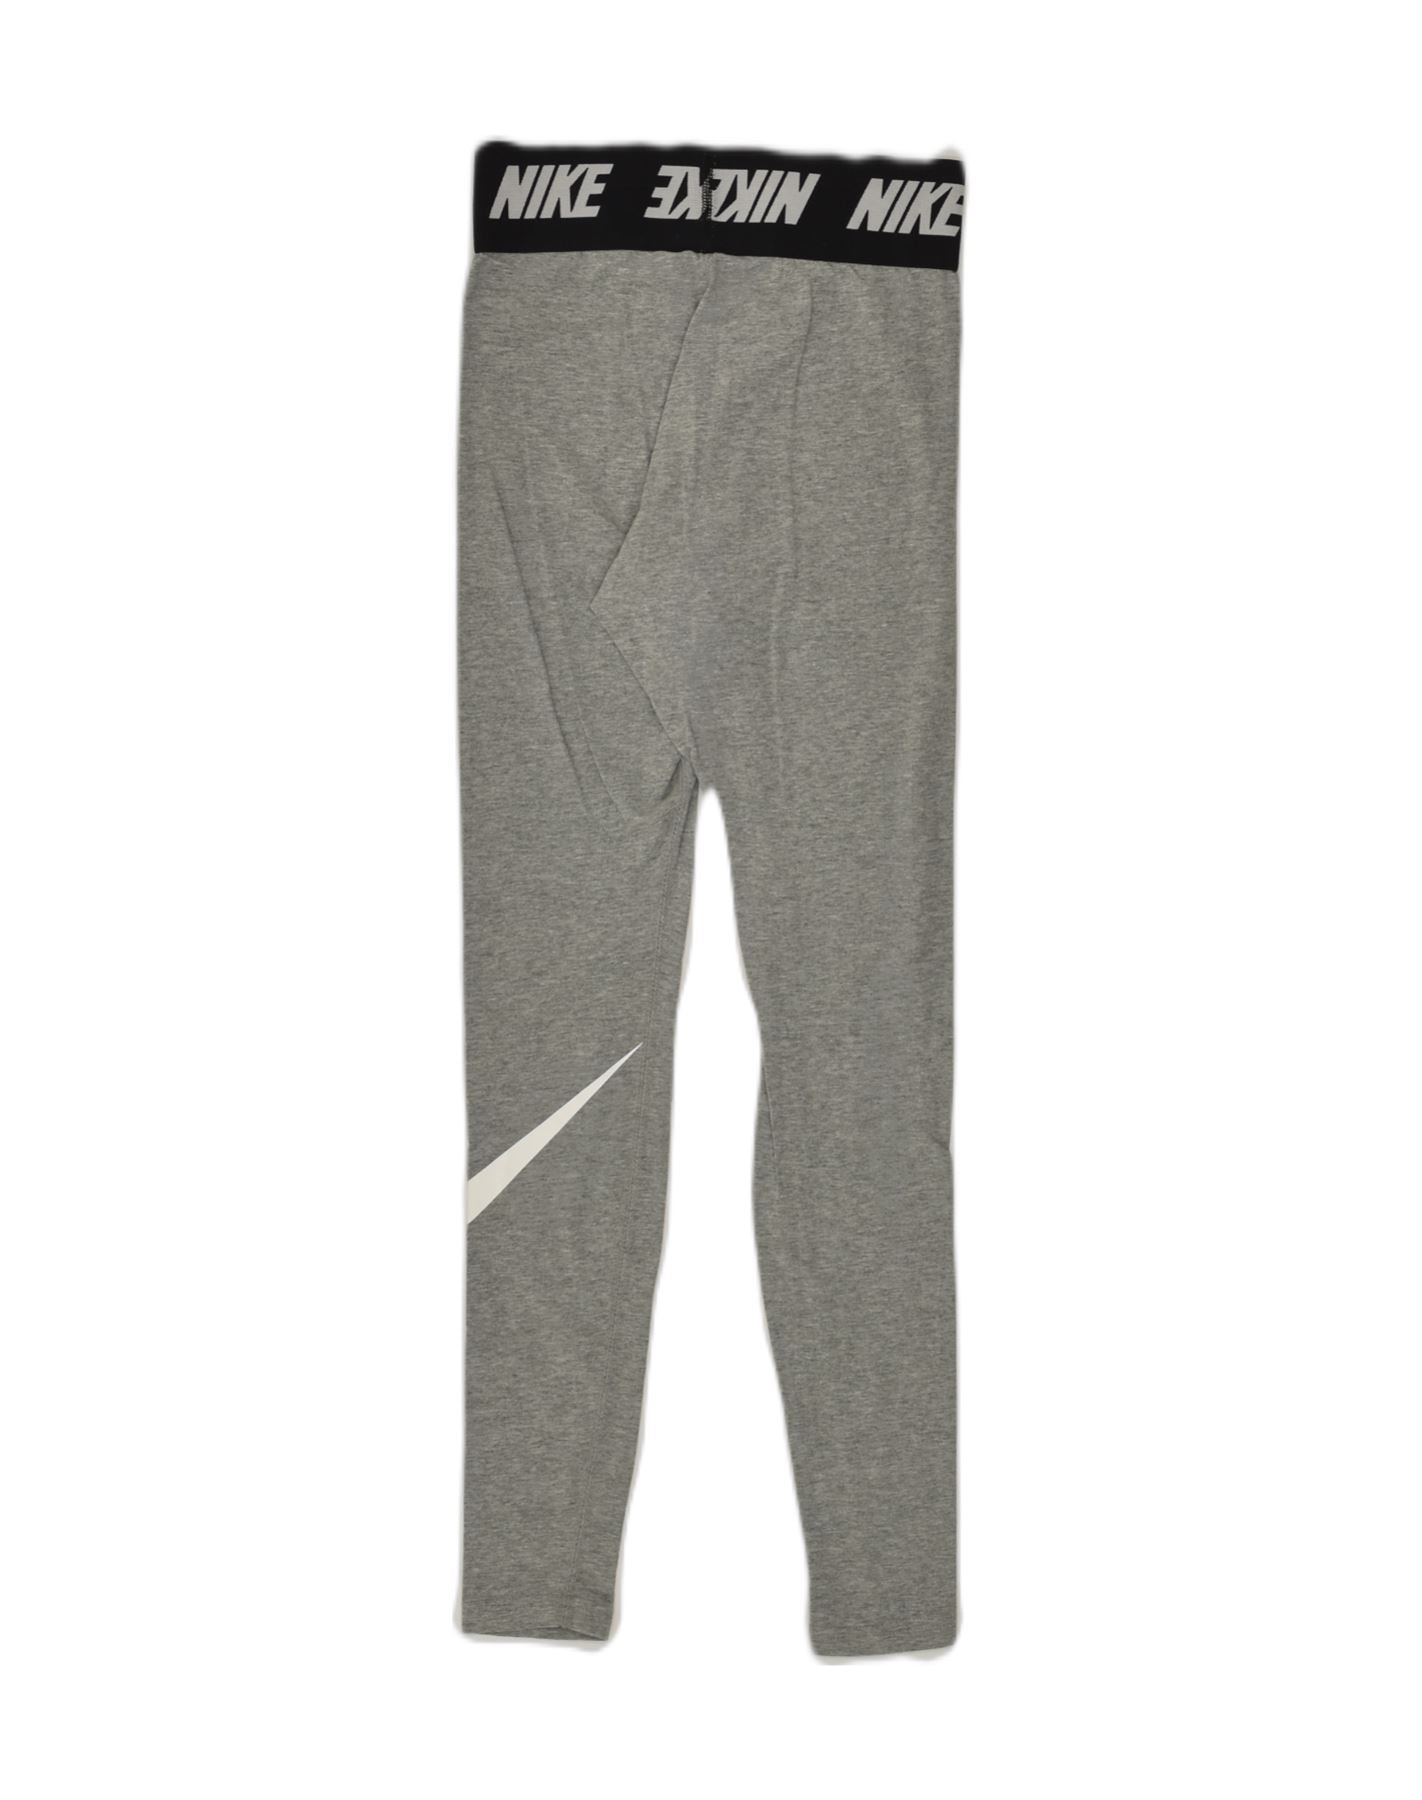 NIKE Womens Graphic Leggings UK 8 Small W24 L26 Grey Cotton, Vintage &  Second-Hand Clothing Online